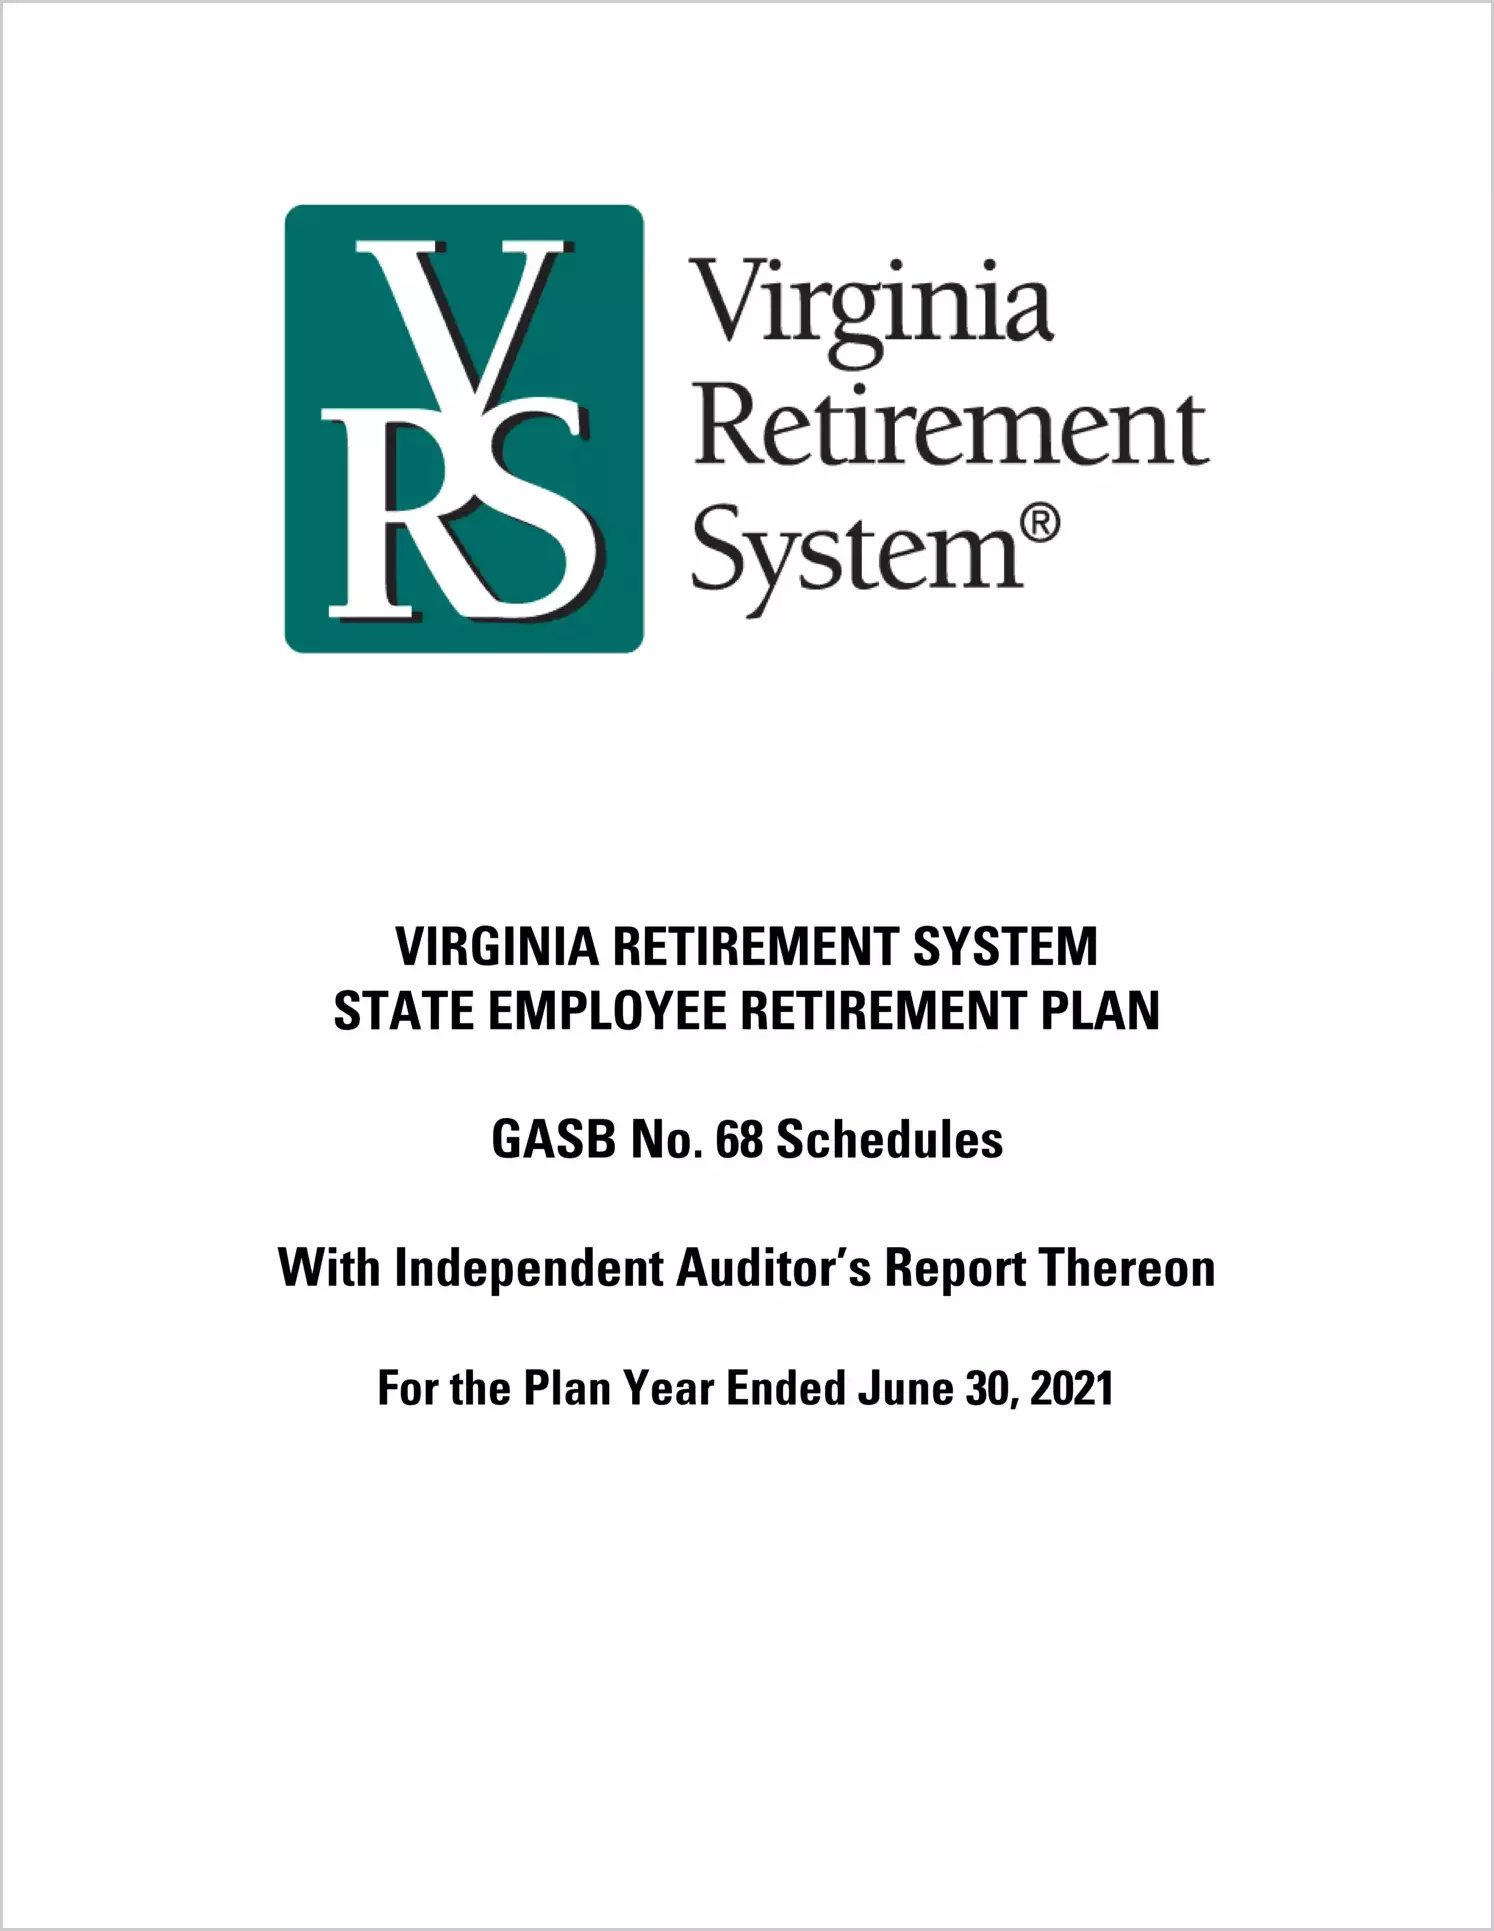 GASB 68 Schedule - Virginia Retirement System State Employee Retirement Plan for the year ended June 30, 2021